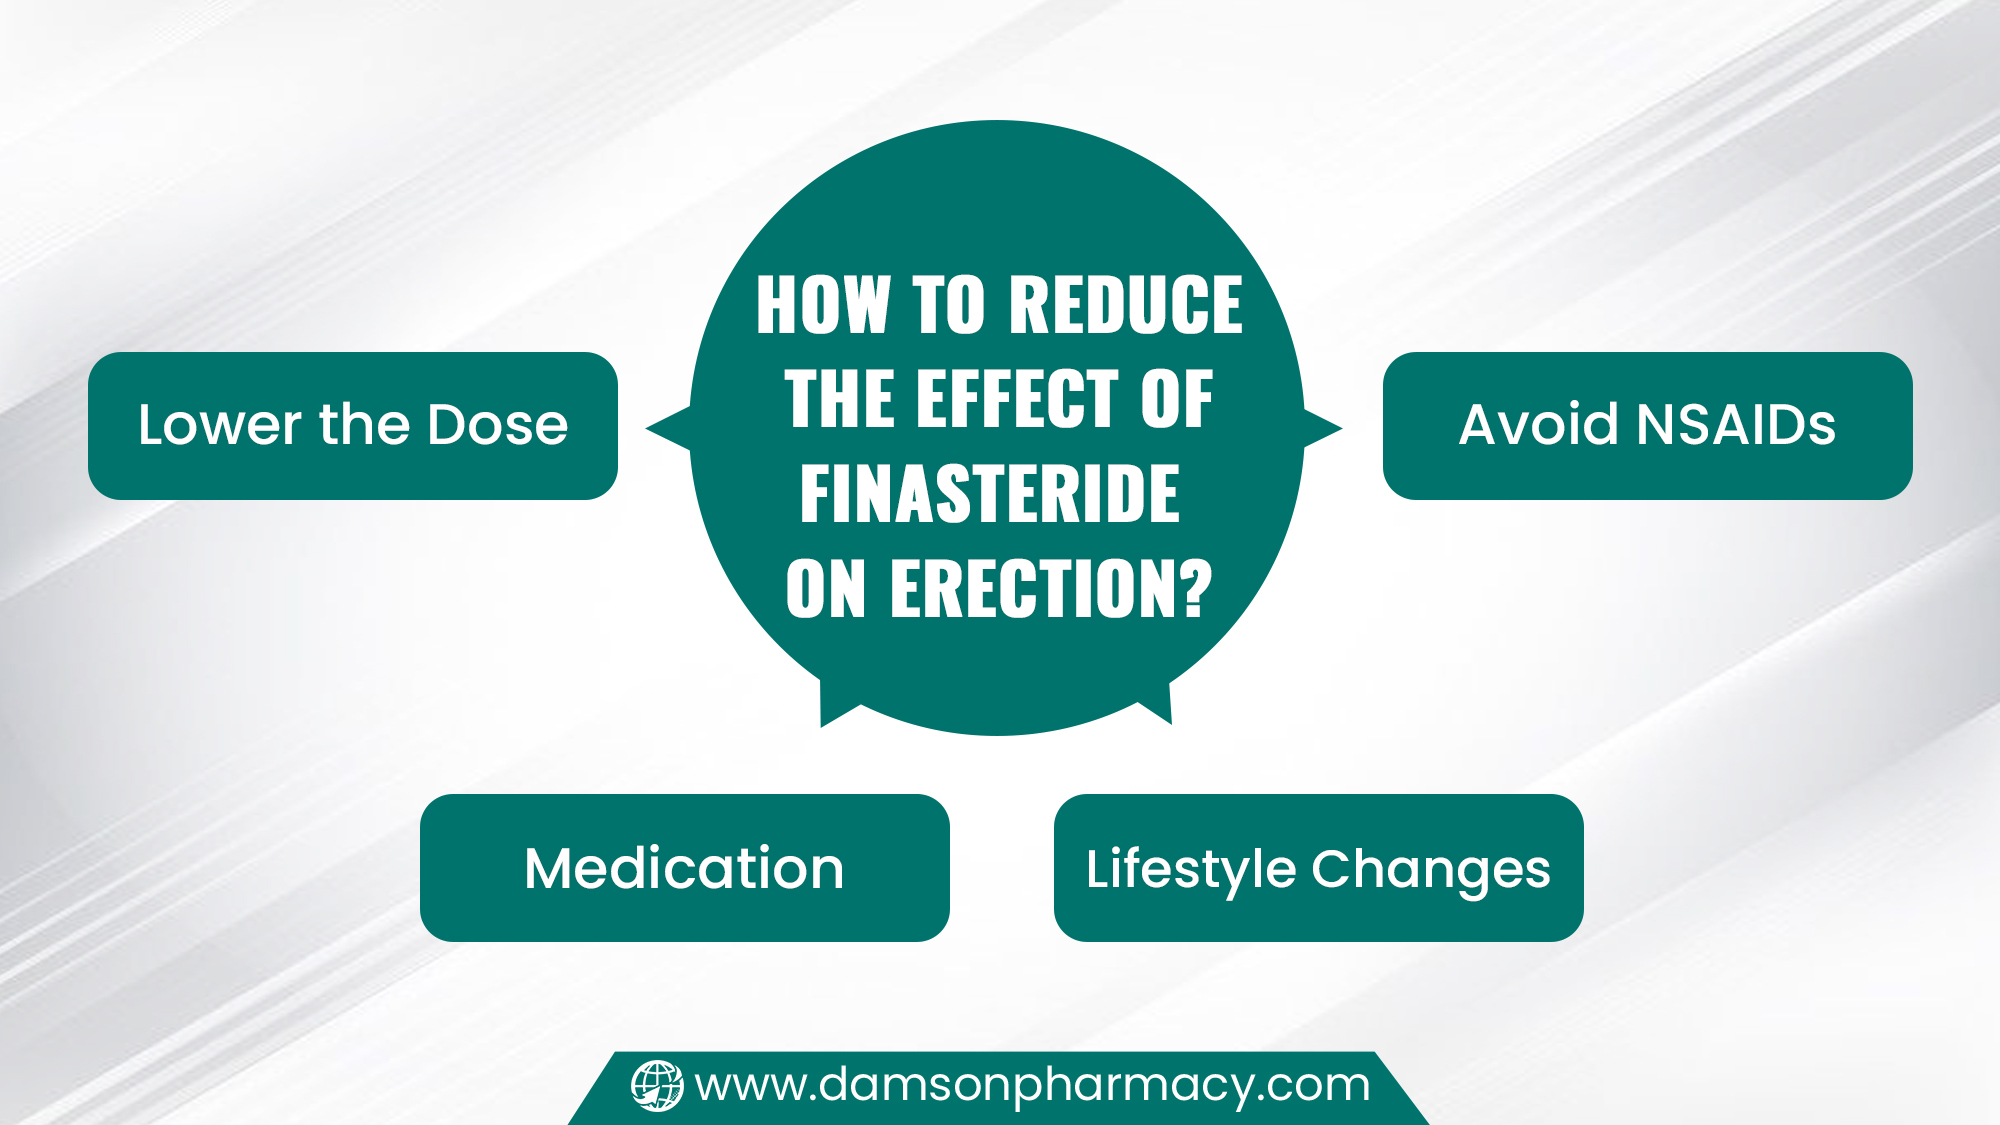 How to Reduce the Effect of Finasteride on Erection